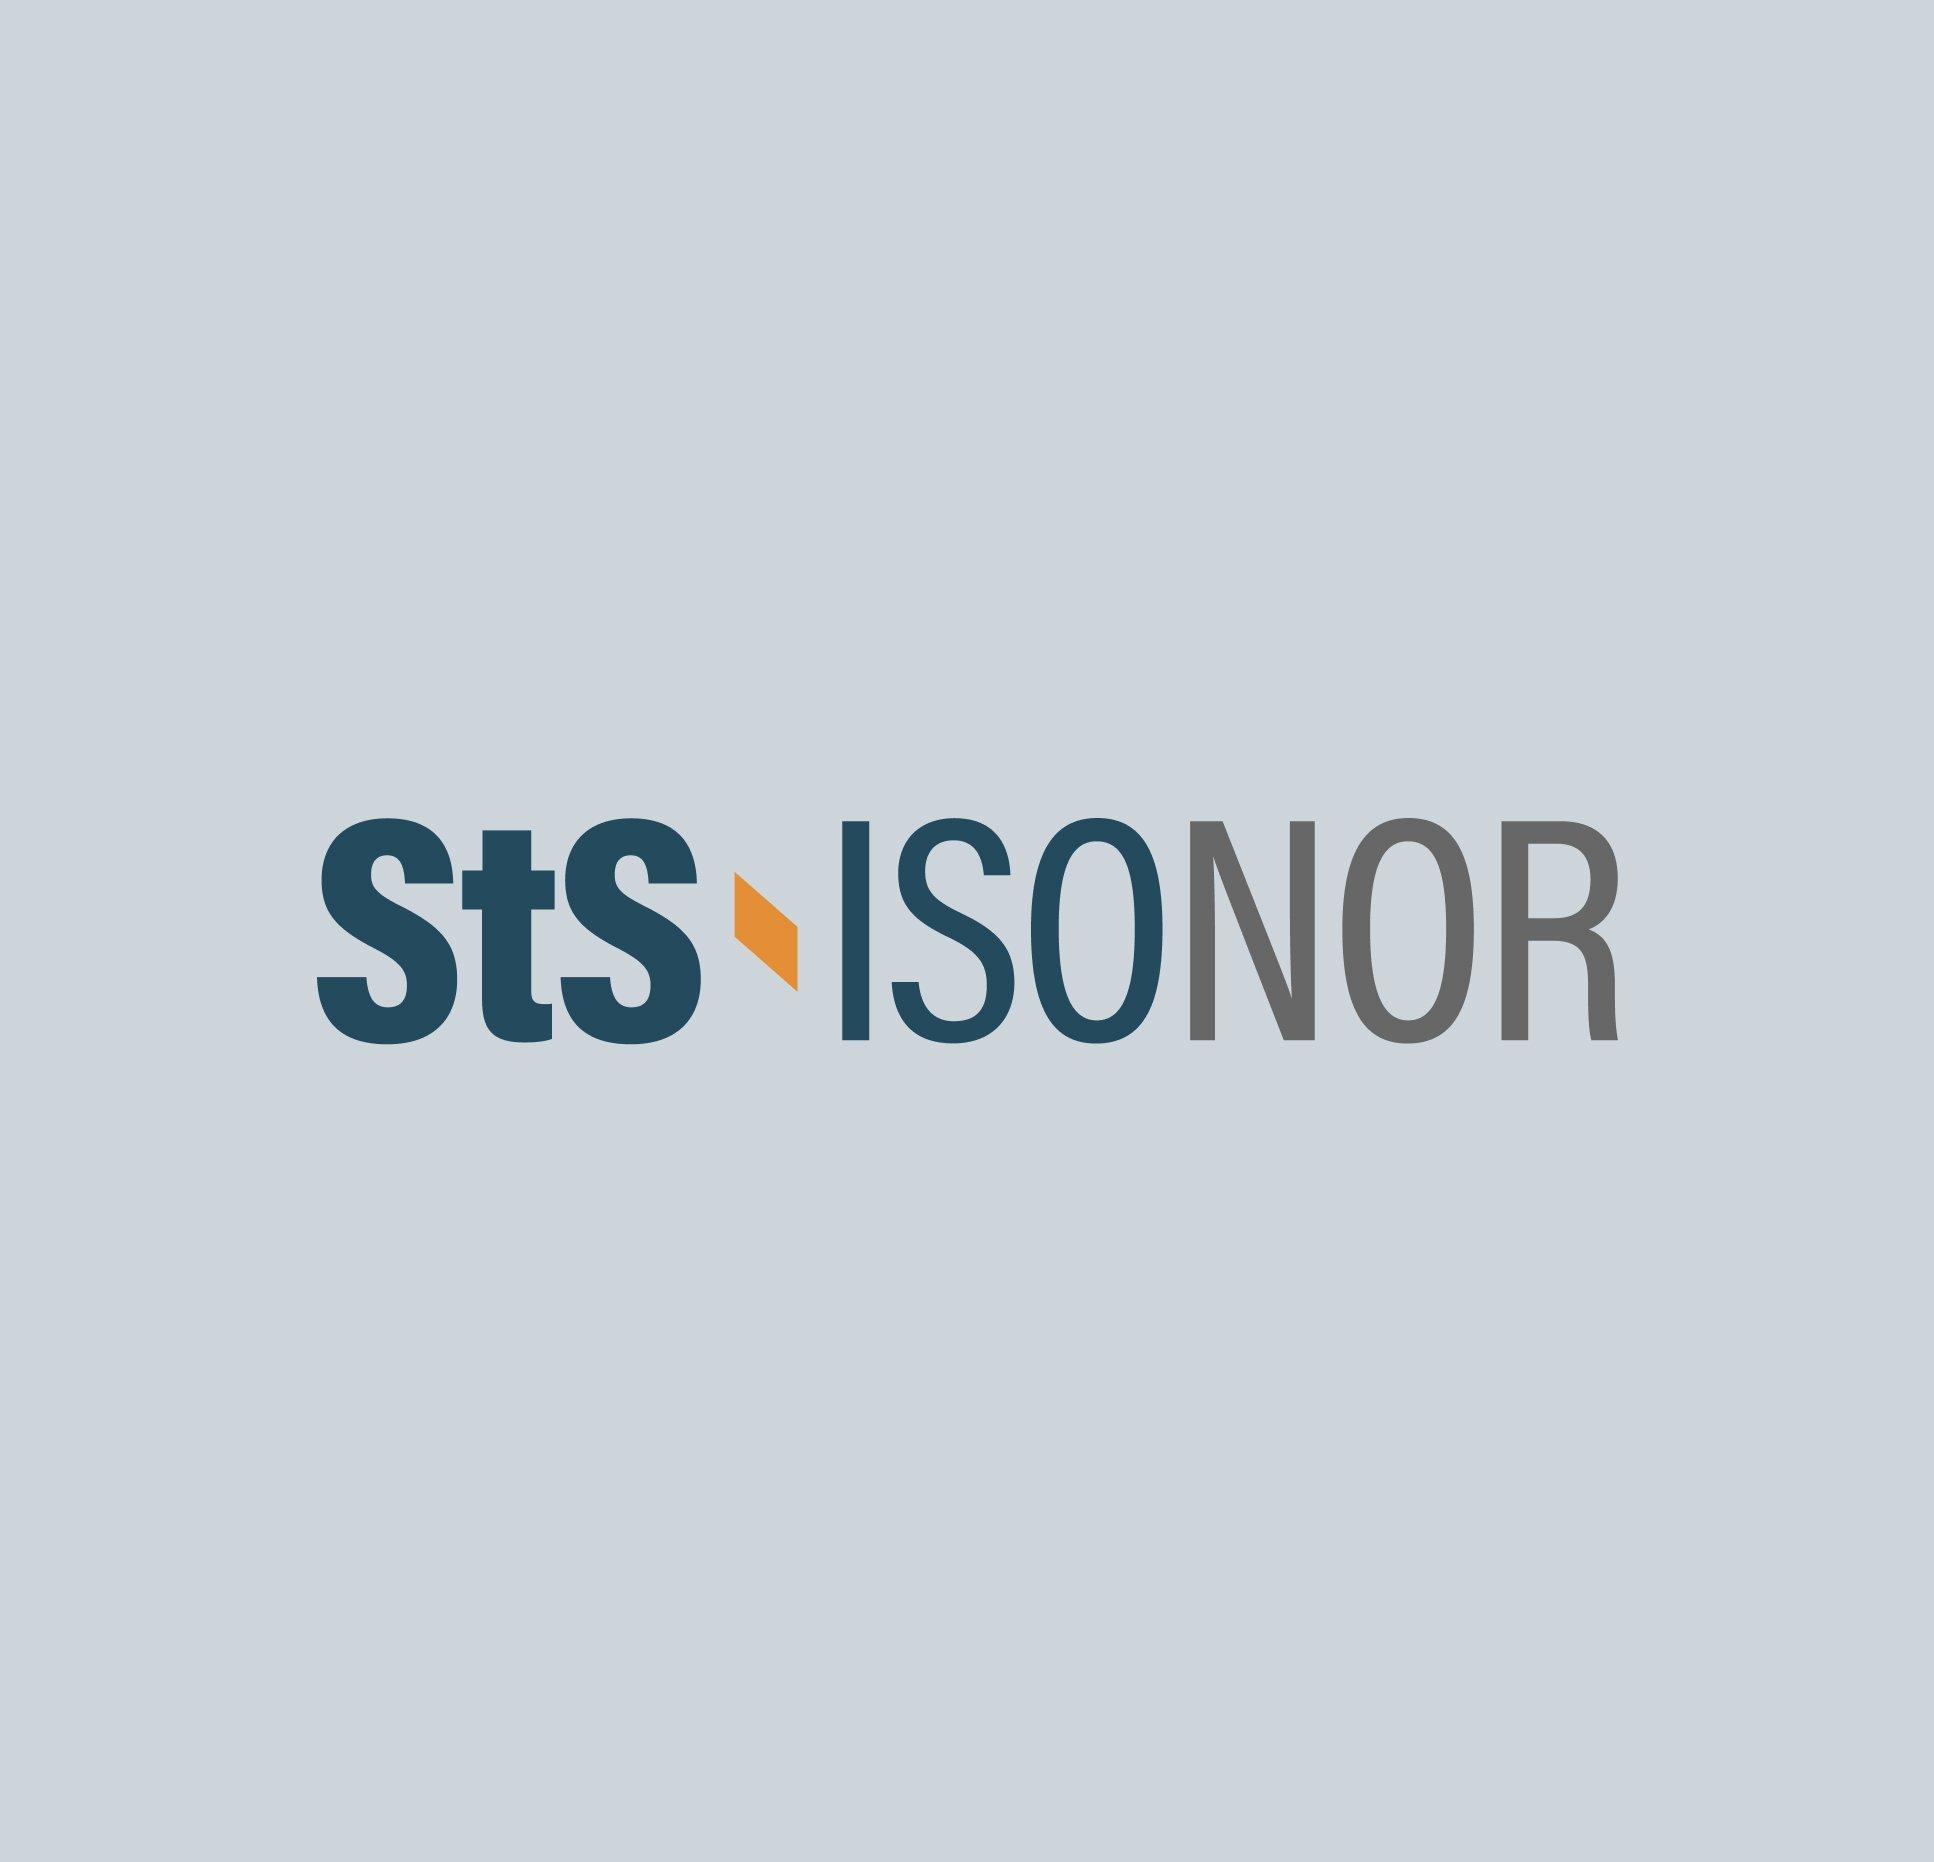 StS-ISONOR logo picture